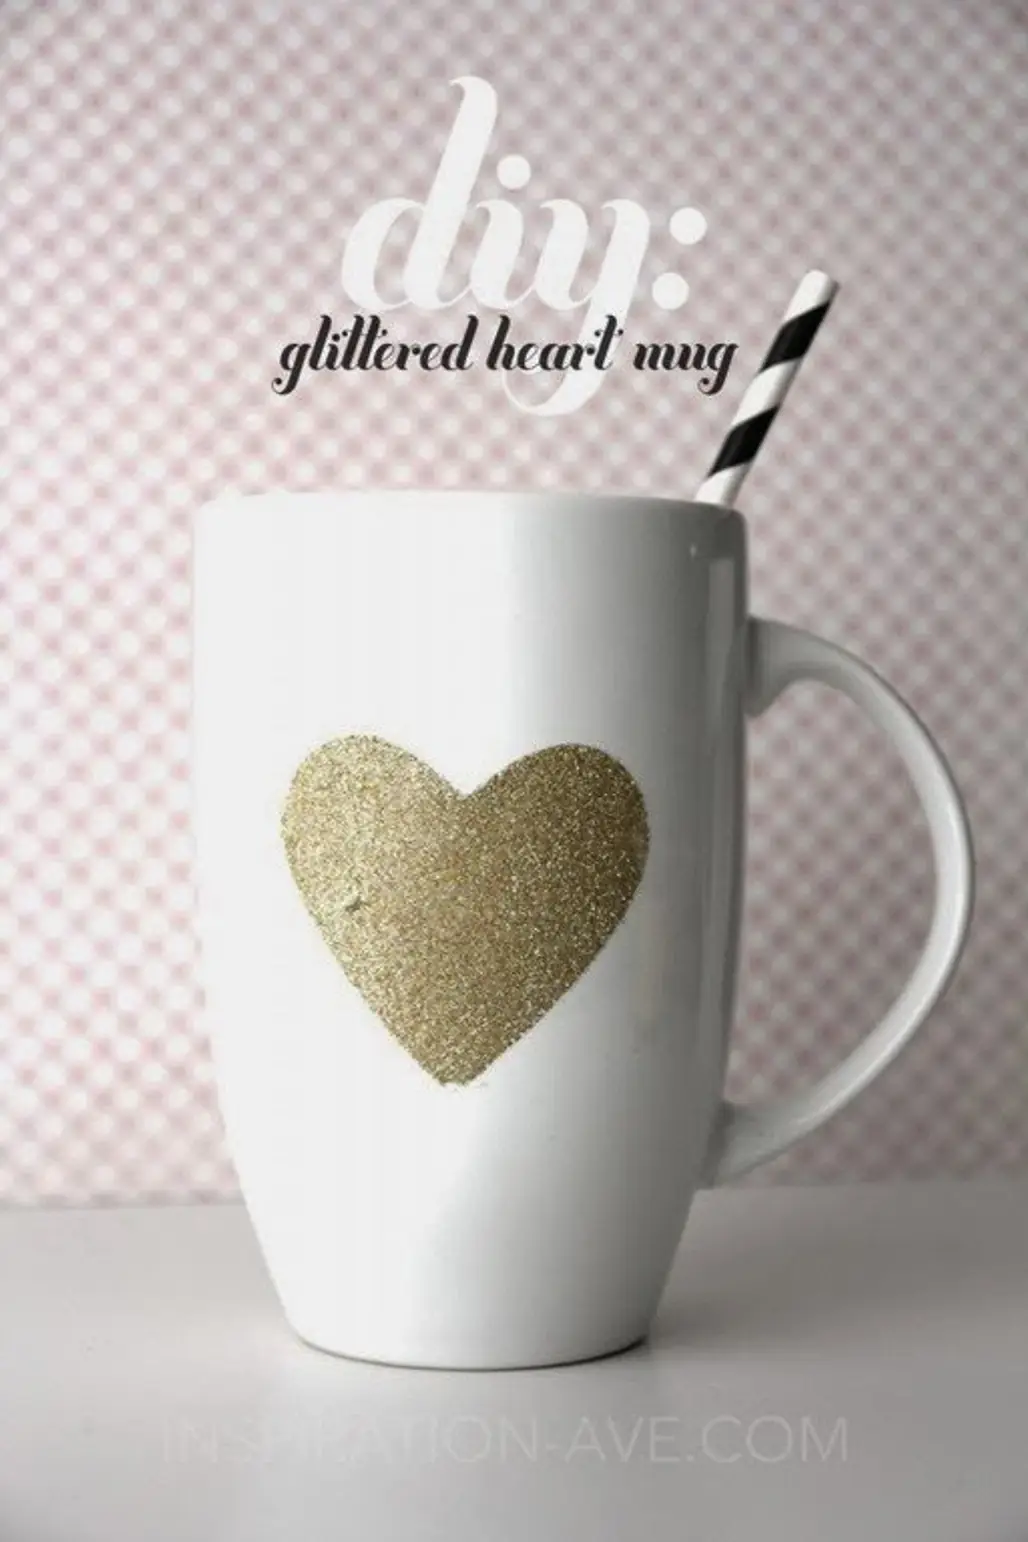 cup,coffee cup,font,heart,organ,